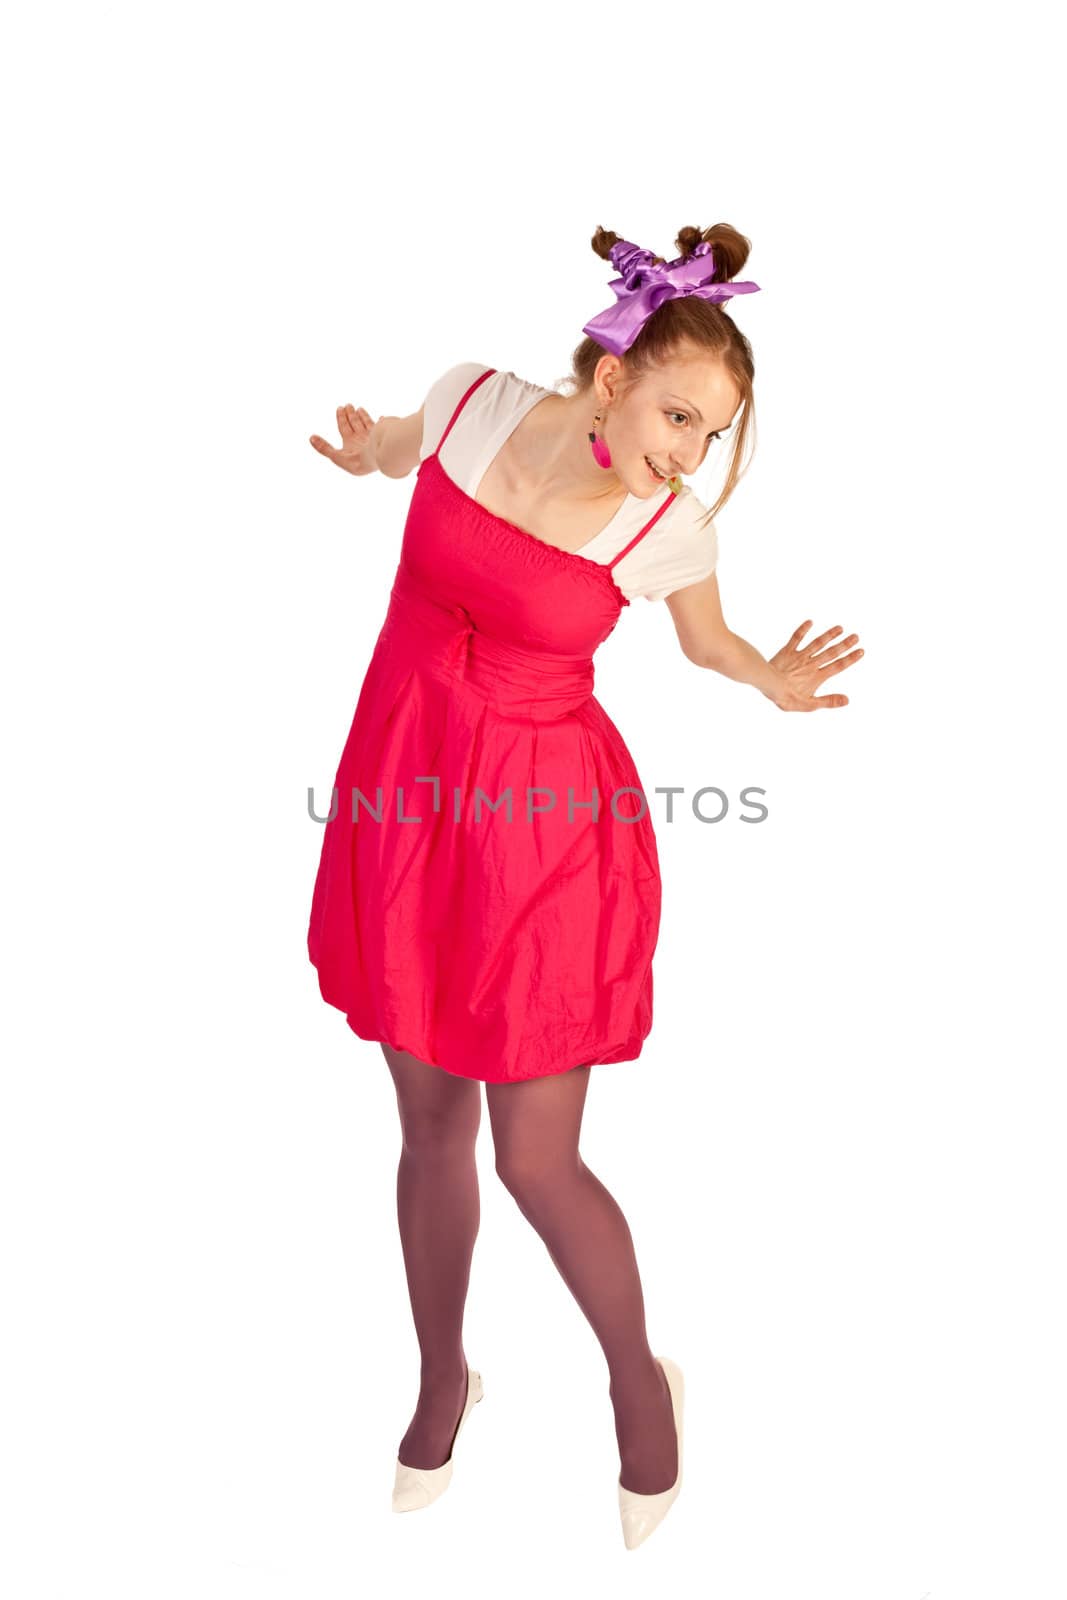 people series:  young funny girl in crimson dress